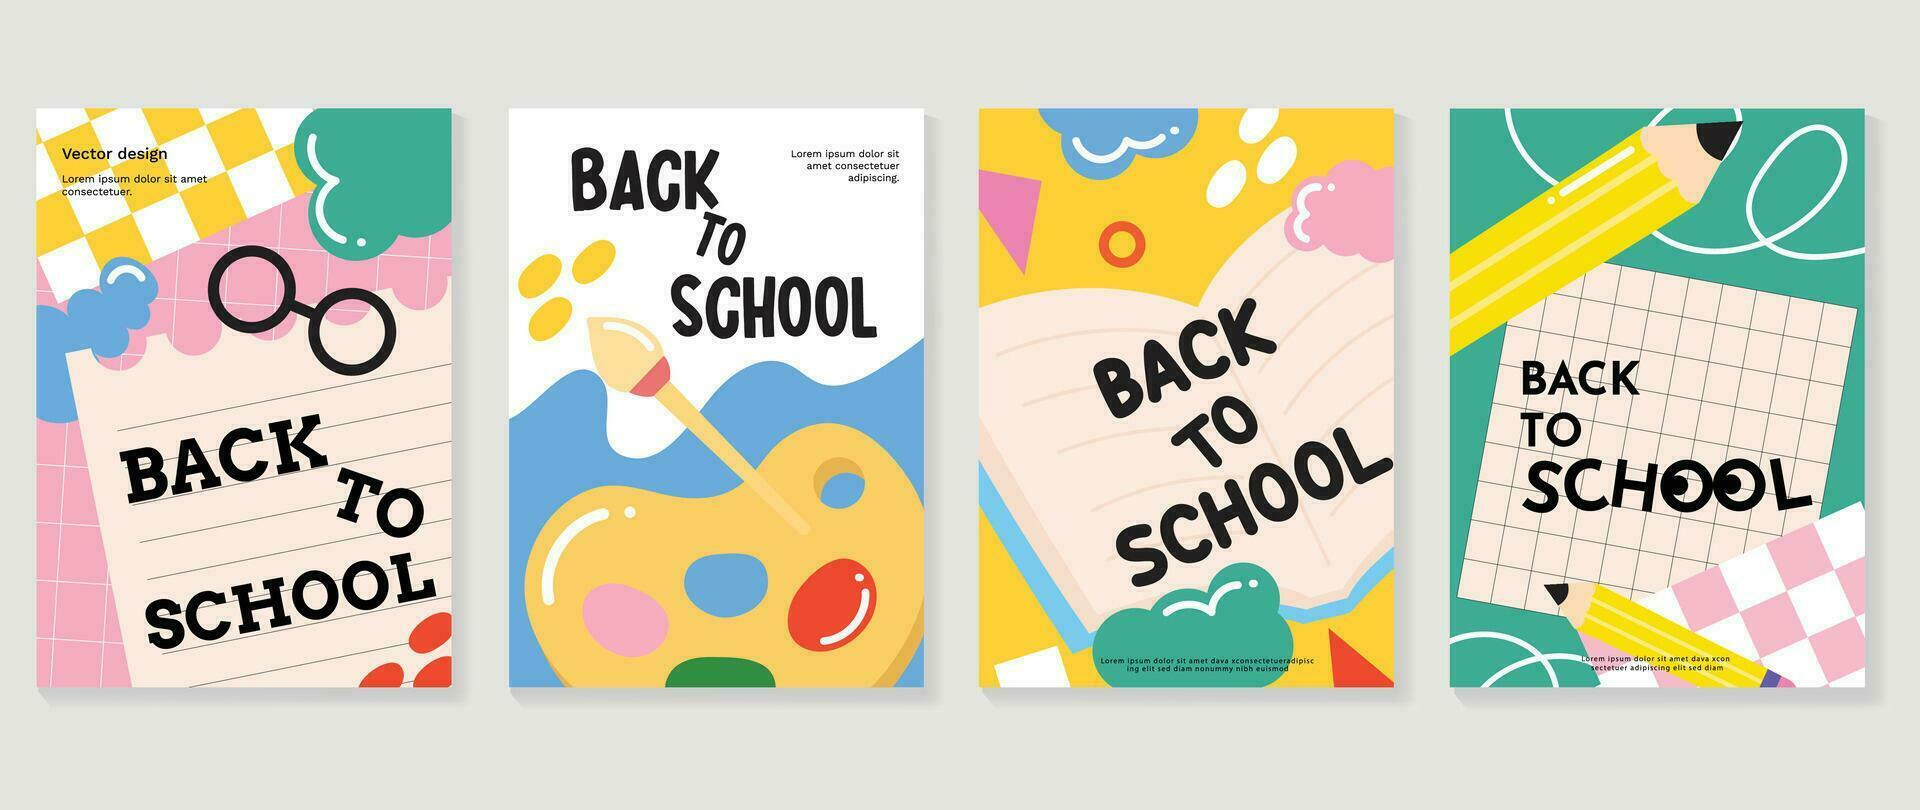 Welcome back to school cover background vector set. Cute childhood illustration with book, pencil, color plate, mathematical symbols. Back to school collection for prints, education, banner.